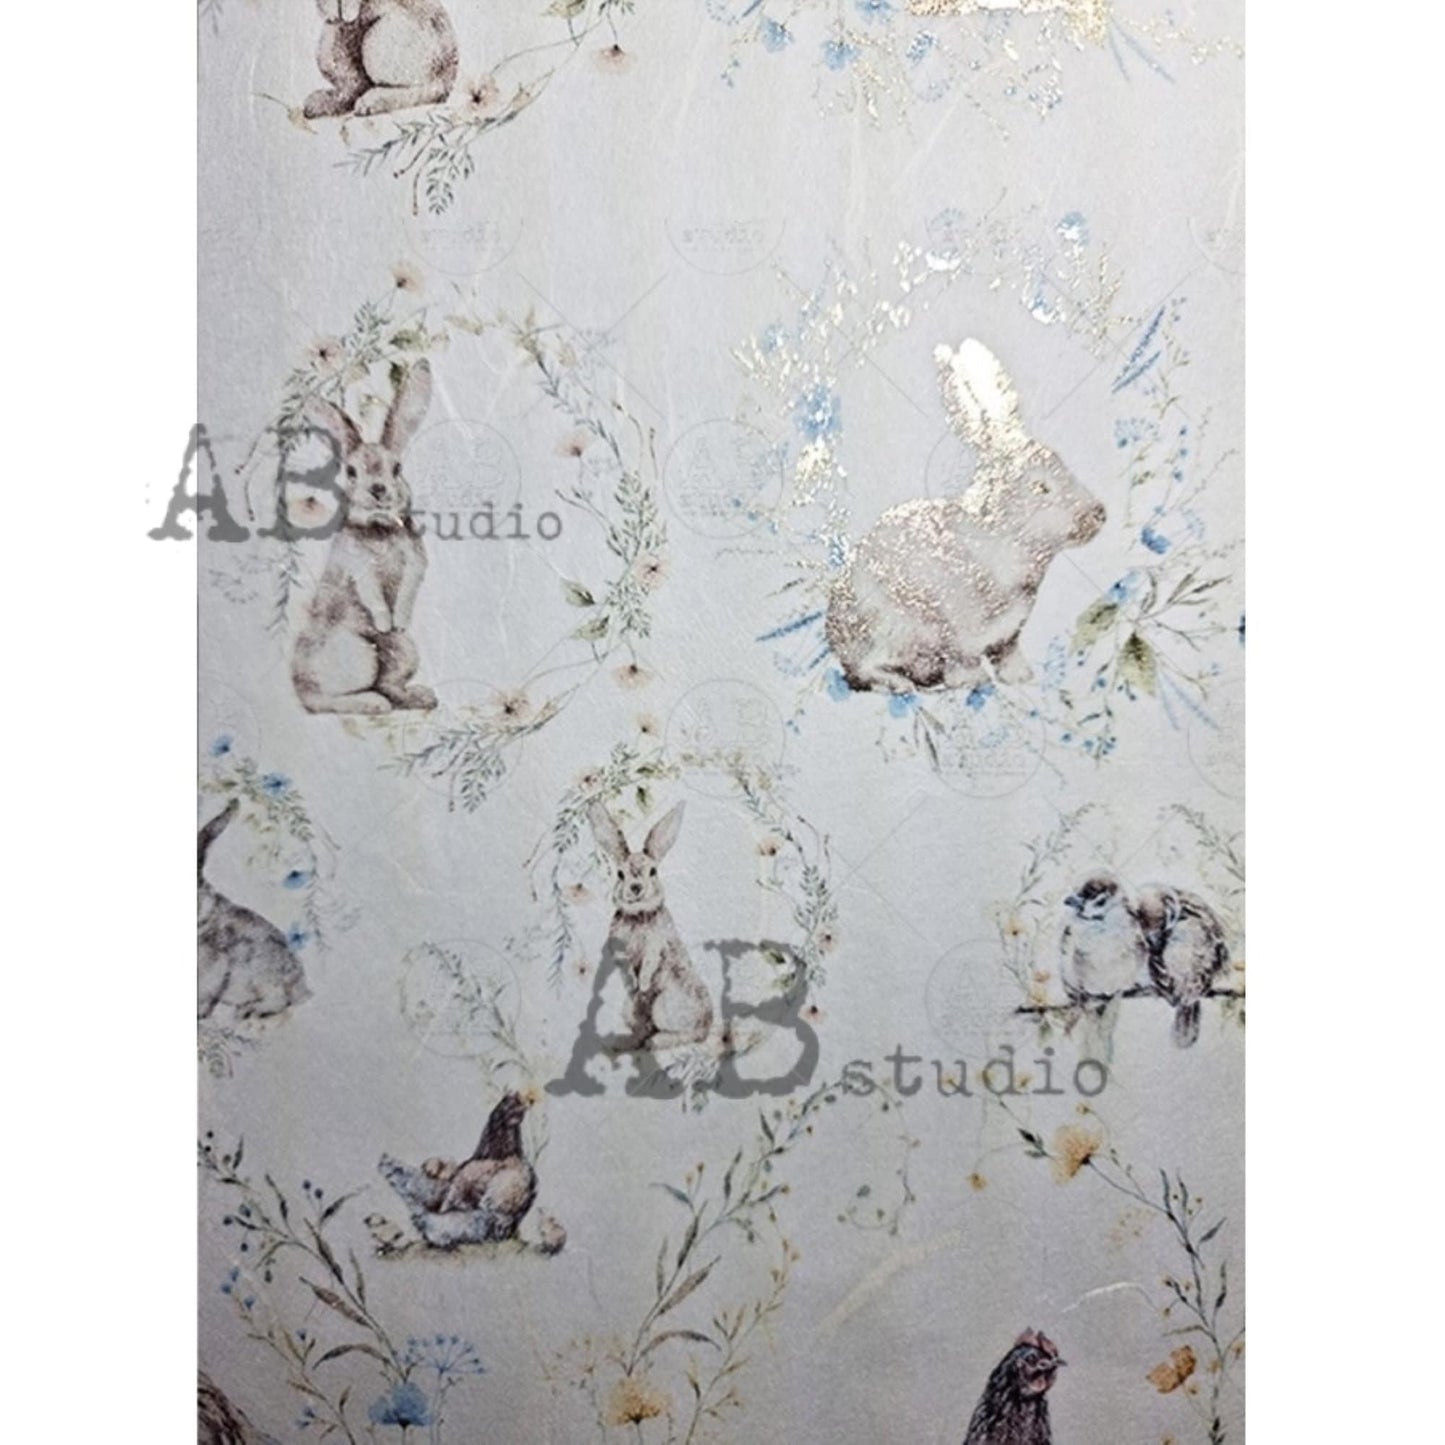 AB Studio Gold Color Gilded Rice Paper for Decoupage, Easter Bunnies, Birds, Wreaths, Rounds, A4 1577, 8.27 X 11.69" Imported Poland